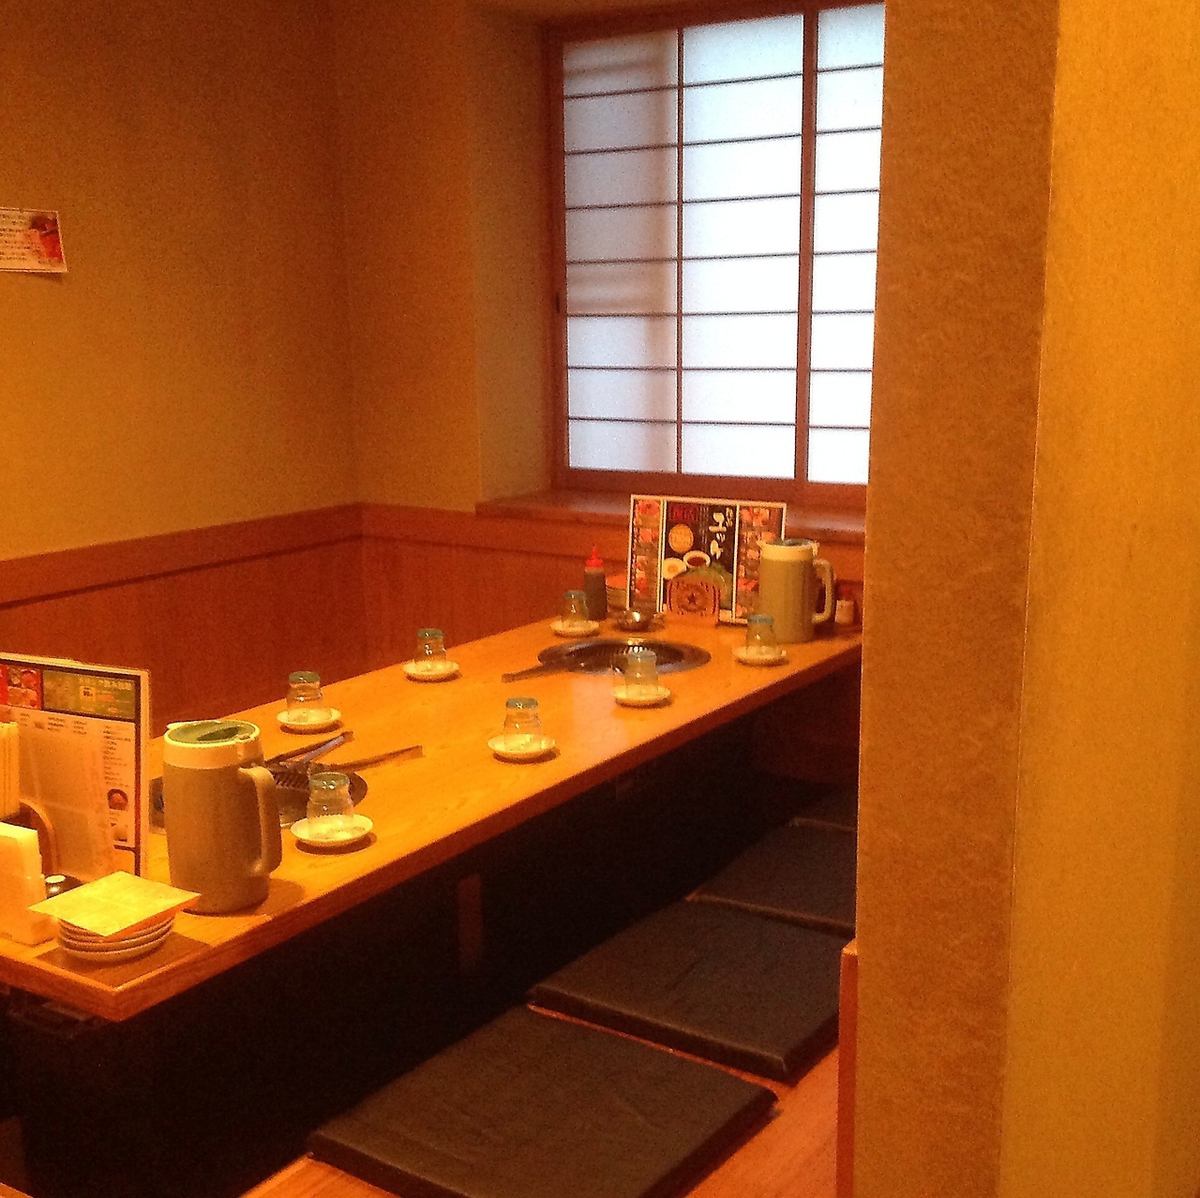 It's a private room with a sunken kotatsu seat, so you can enjoy it without worrying about the voices around you.